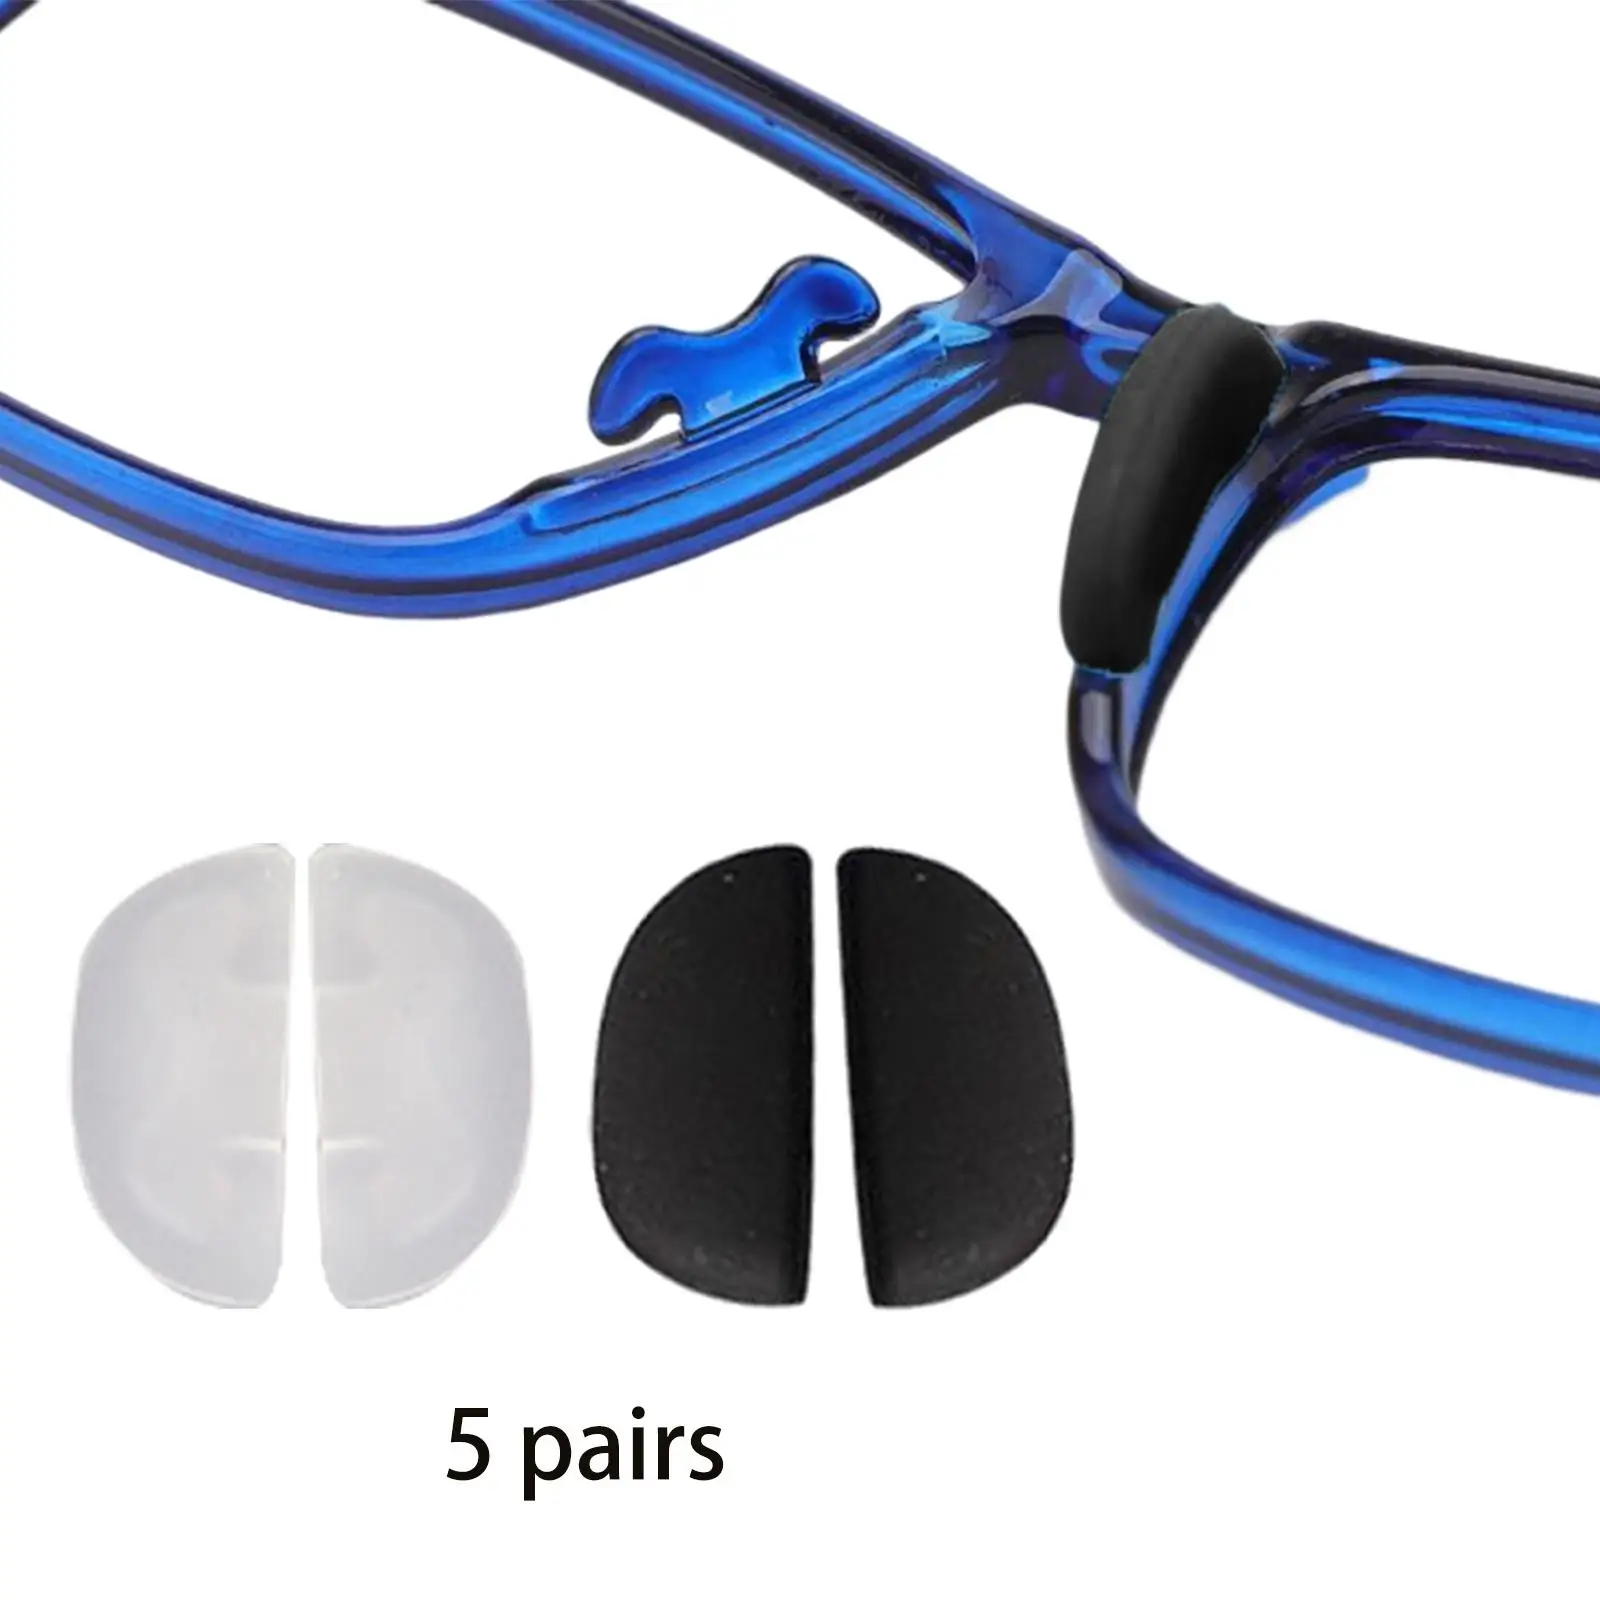 10 Pieces Silicone Children Eyeglass Nose Pads Replace Parts Comfortable Slide/Push in Contoured Soft for Sunglasses Glasses